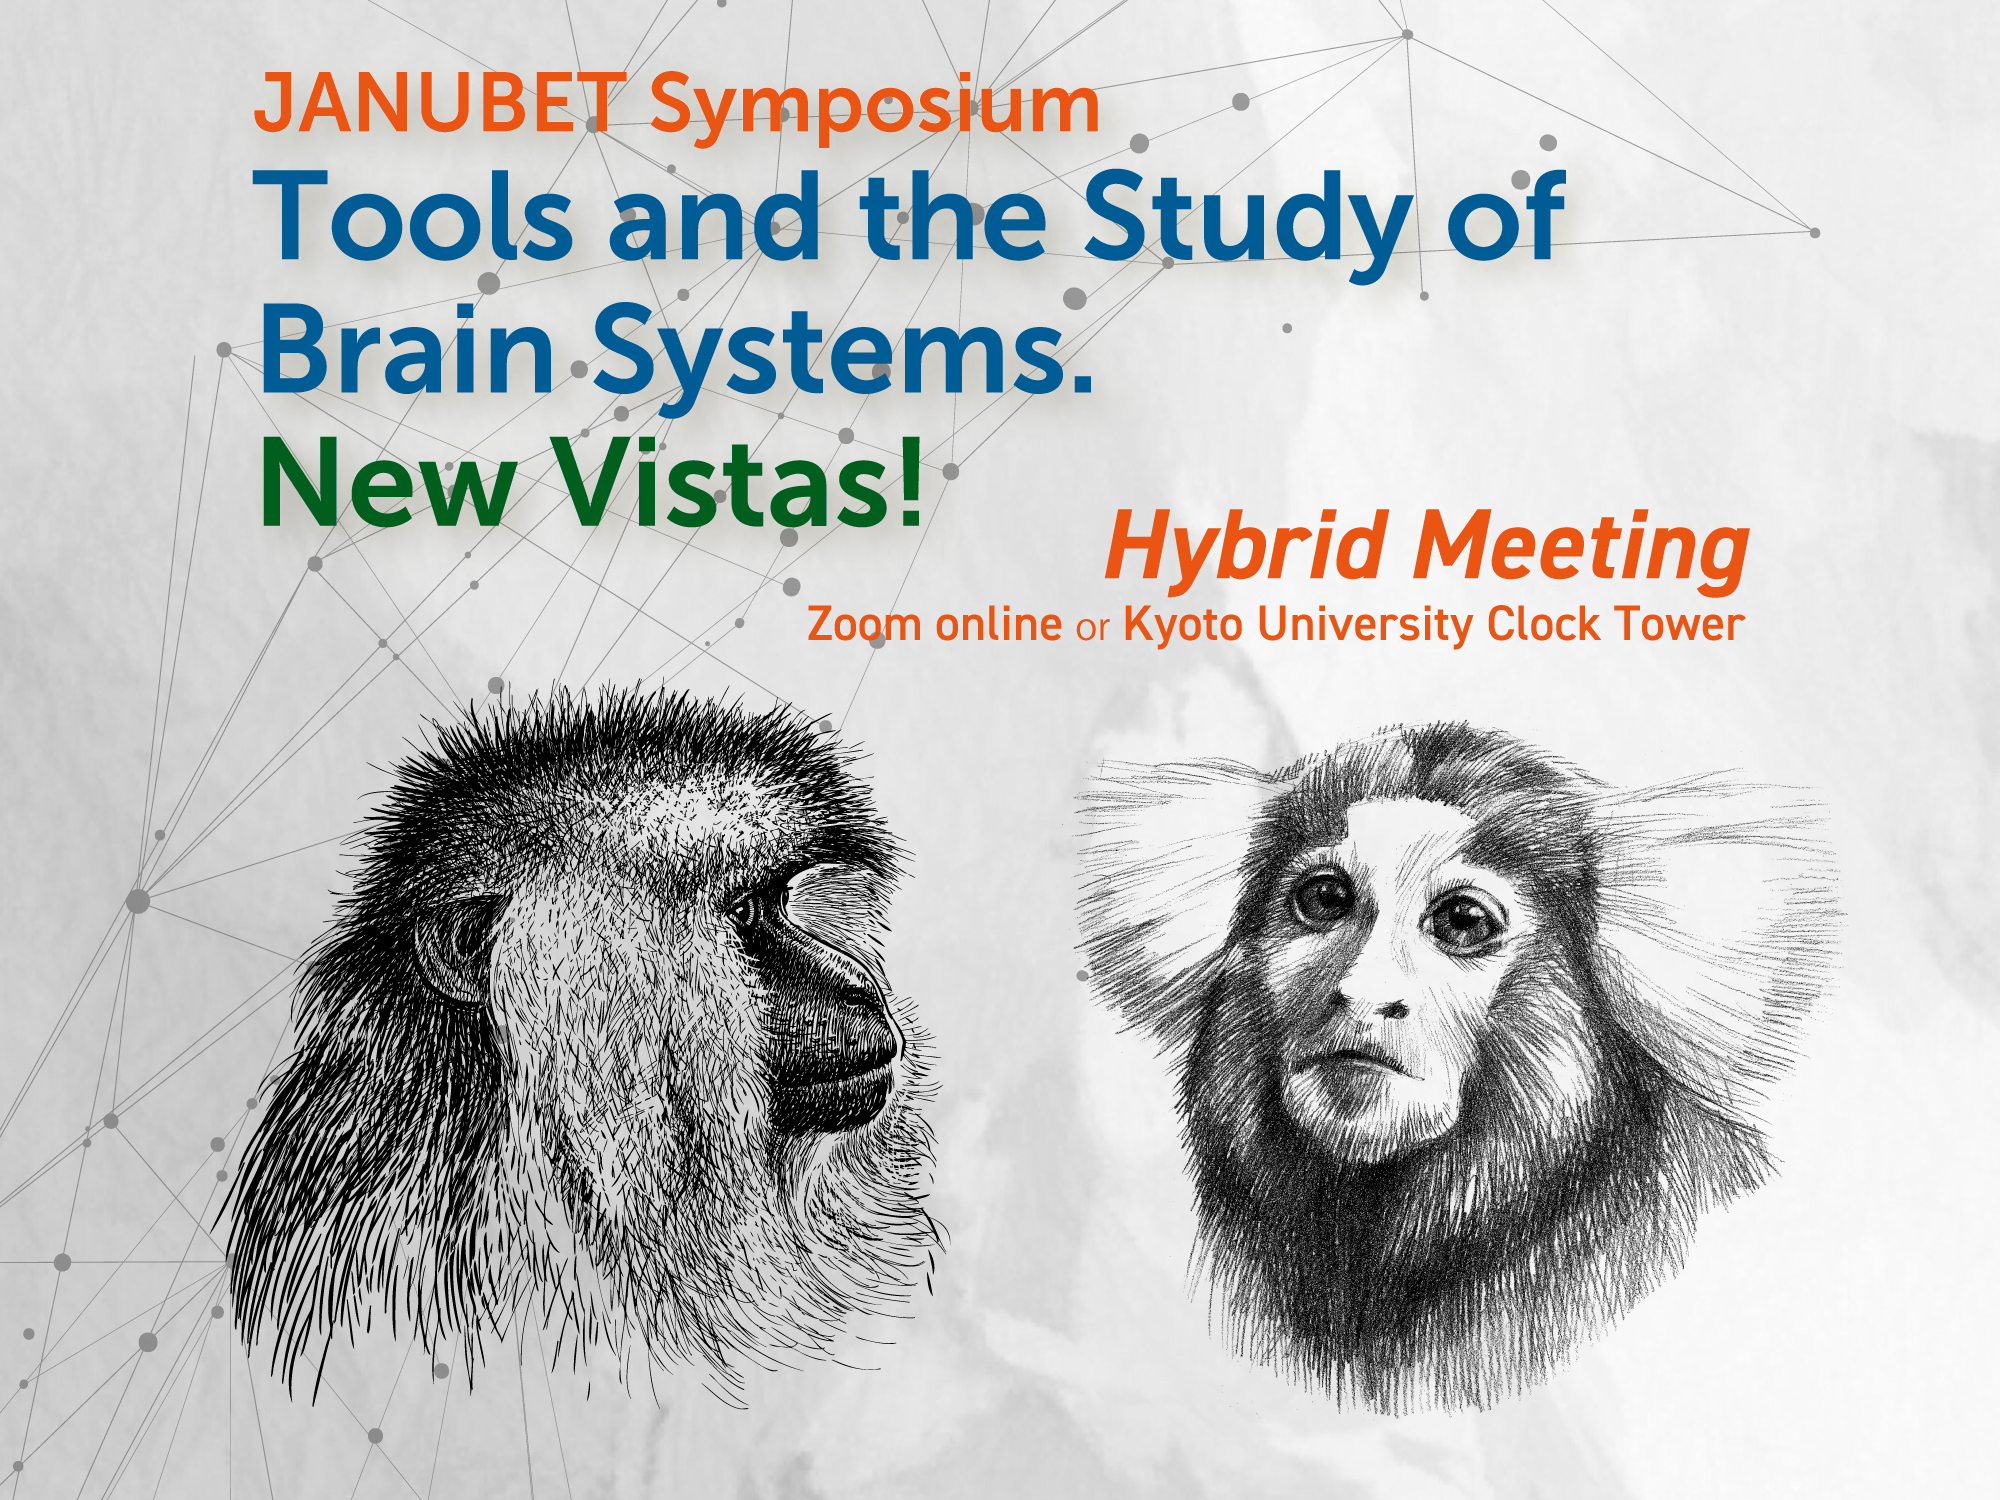 JANUBET Symposium: Tools and the Study of Brain Systems. New Vistas!